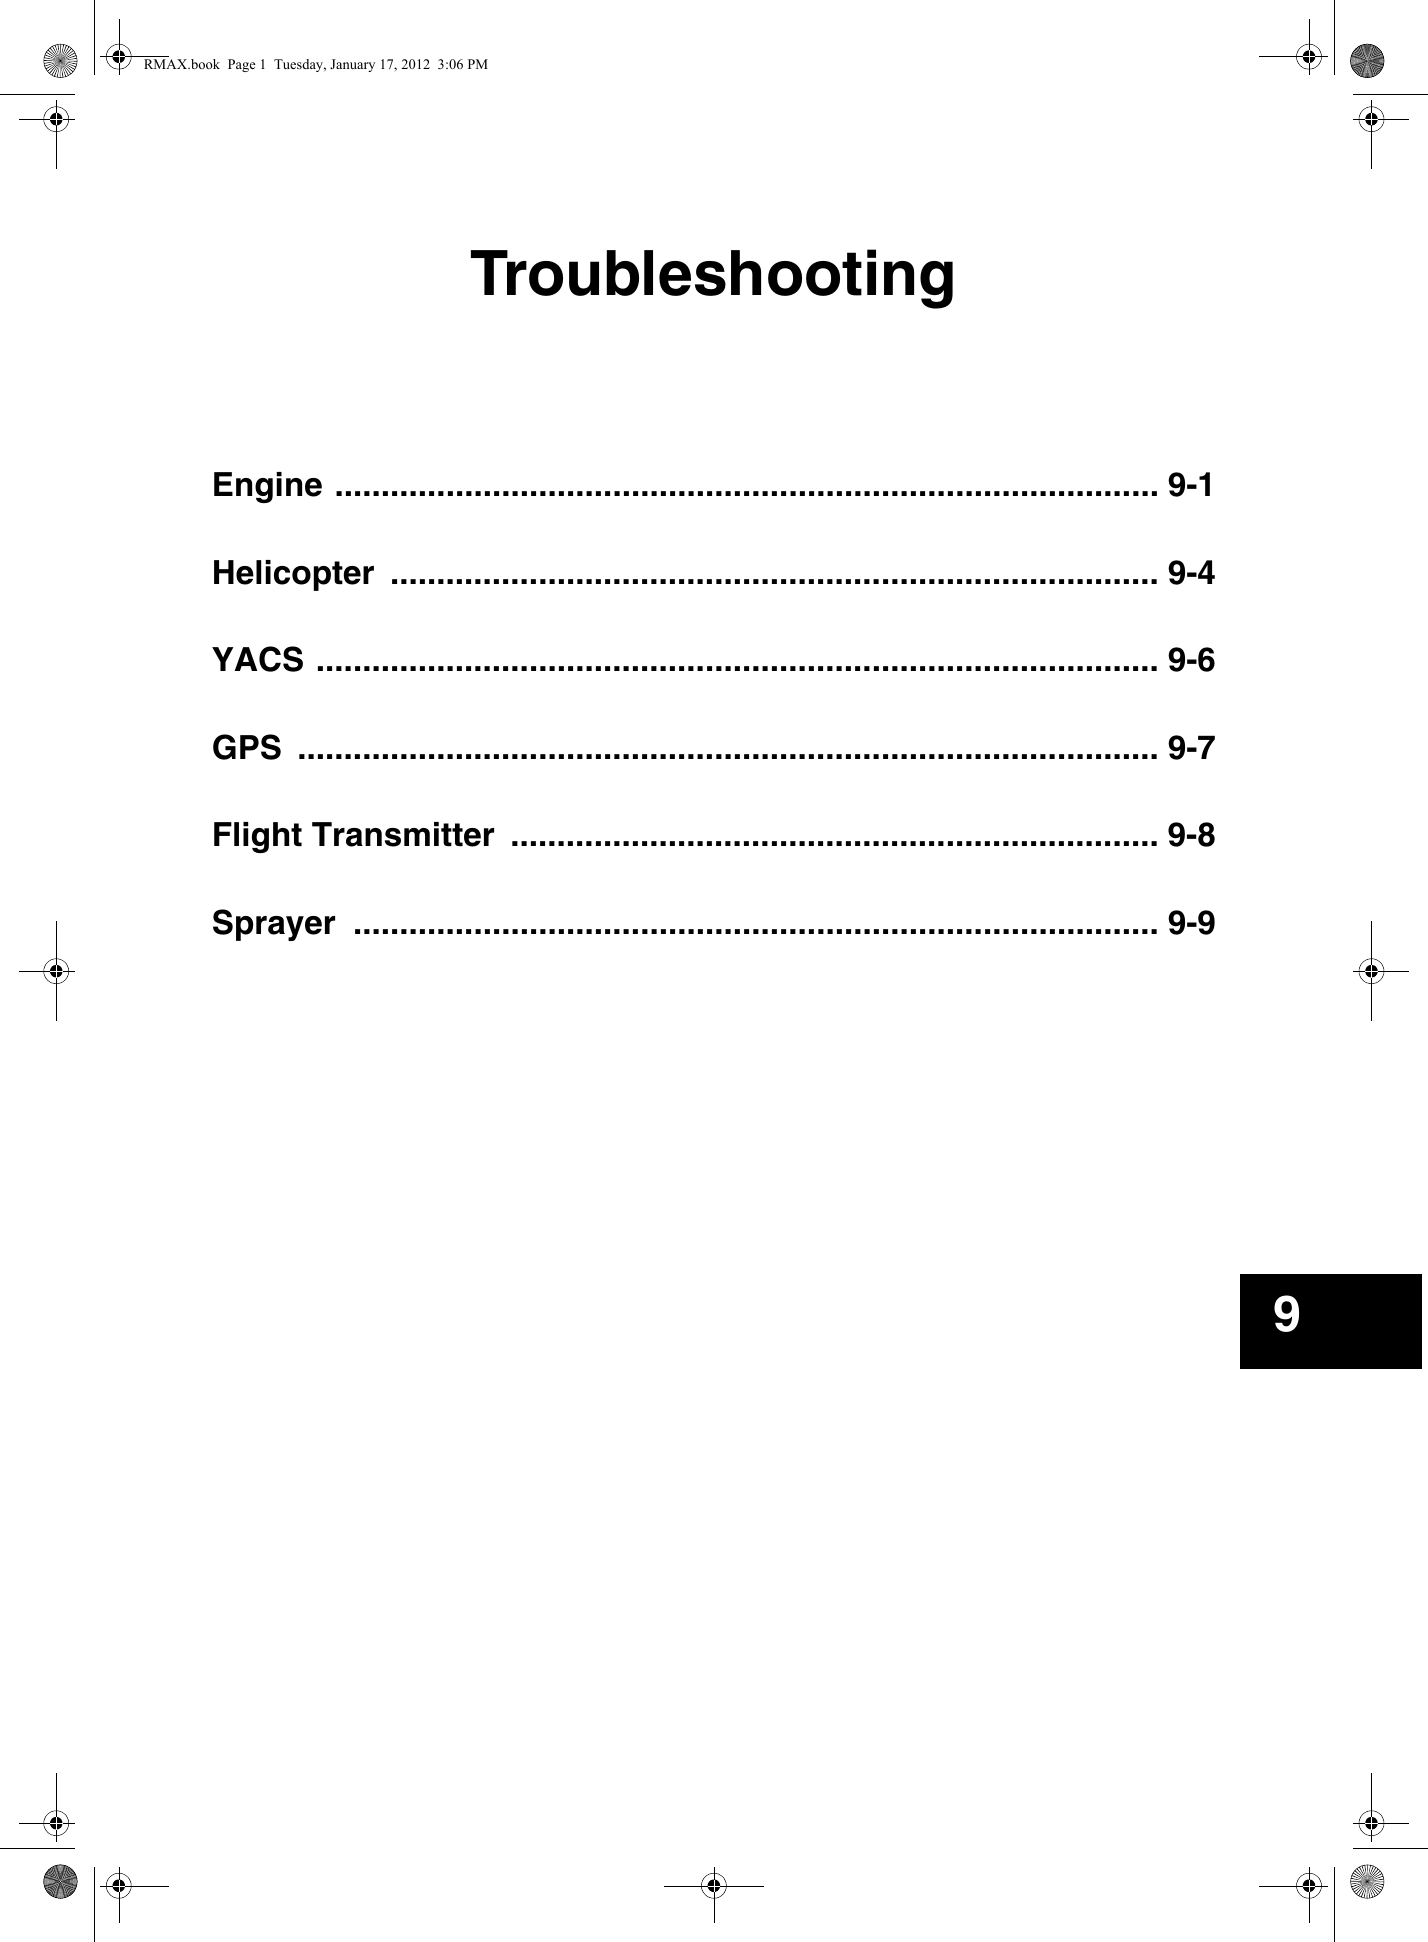 TroubleshootingEngine ......................................................................................... 9-1Helicopter ................................................................................... 9-4YACS ........................................................................................... 9-6GPS ............................................................................................. 9-7Flight Transmitter  ...................................................................... 9-8Sprayer ....................................................................................... 9-99RMAX.book  Page 1  Tuesday, January 17, 2012  3:06 PM